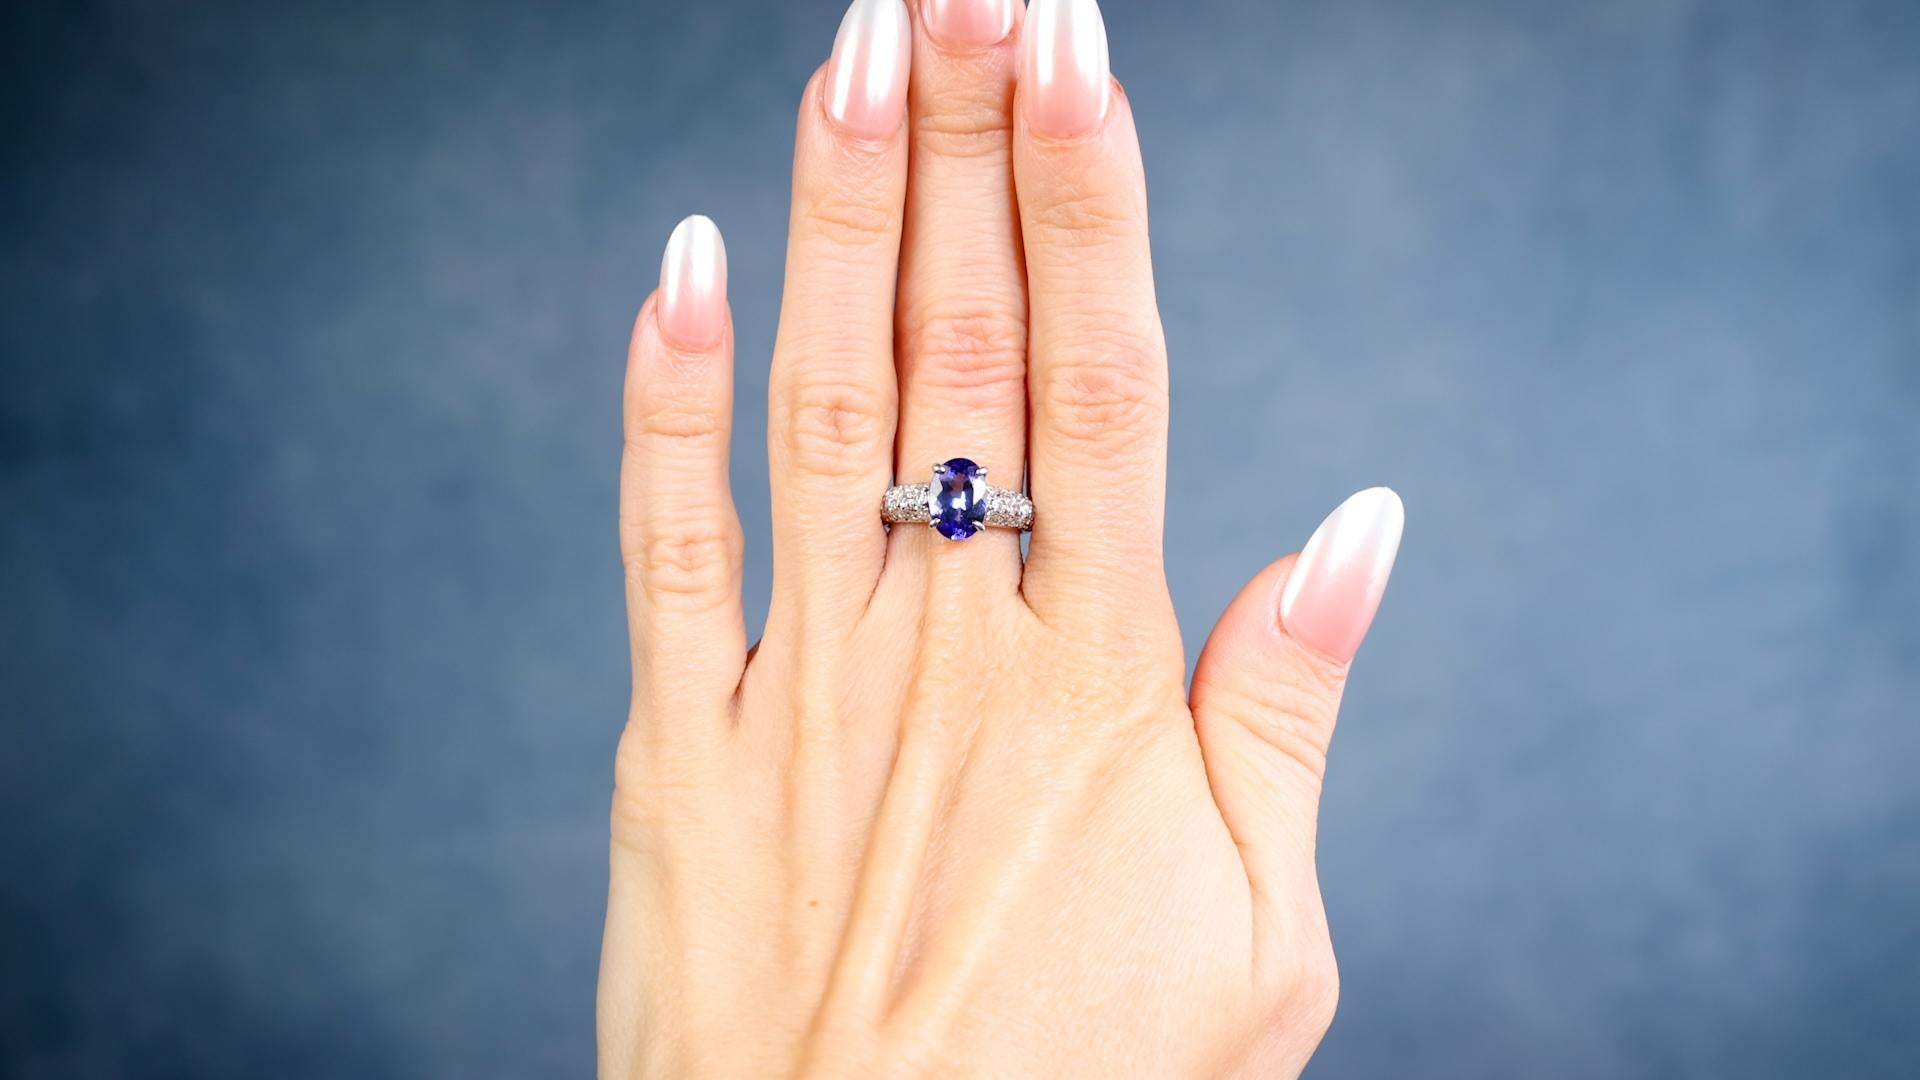 One Tanzanite Diamond Platinum Ring. Featuring one oval cut tanzanite of 1.82 carats. Accented by 30 round brilliant cut diamonds with a total weight of 0.52 carat, graded H-I color, VS clarity. Crafted in platinum with purity mark and gemstone